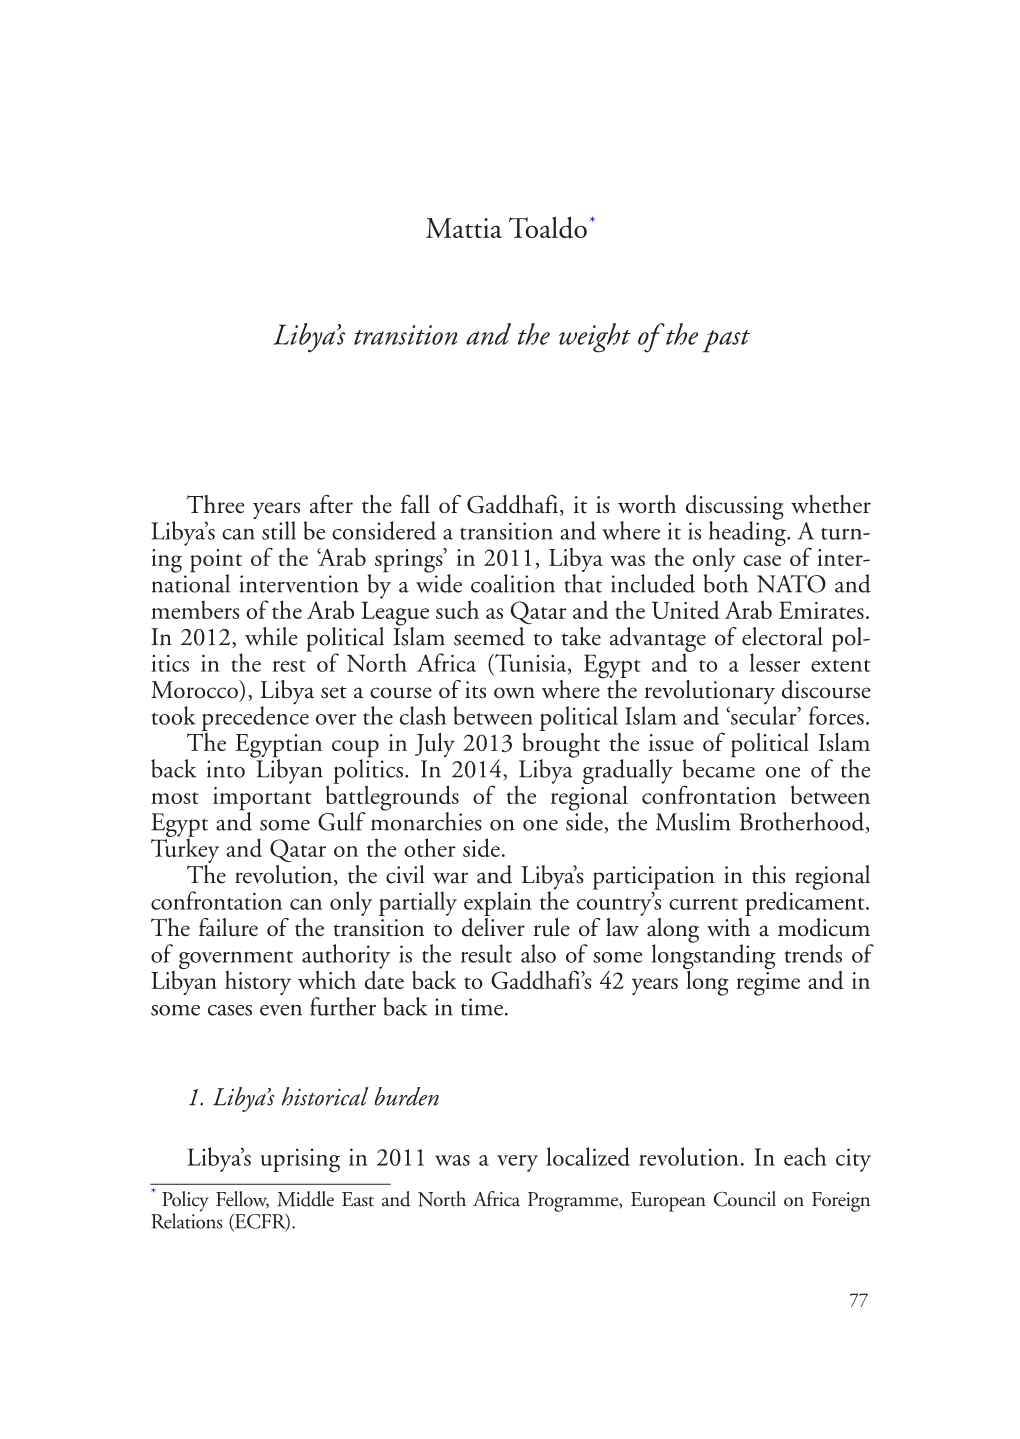 Mattia Toaldo* Libya's Transition and the Weight of the Past